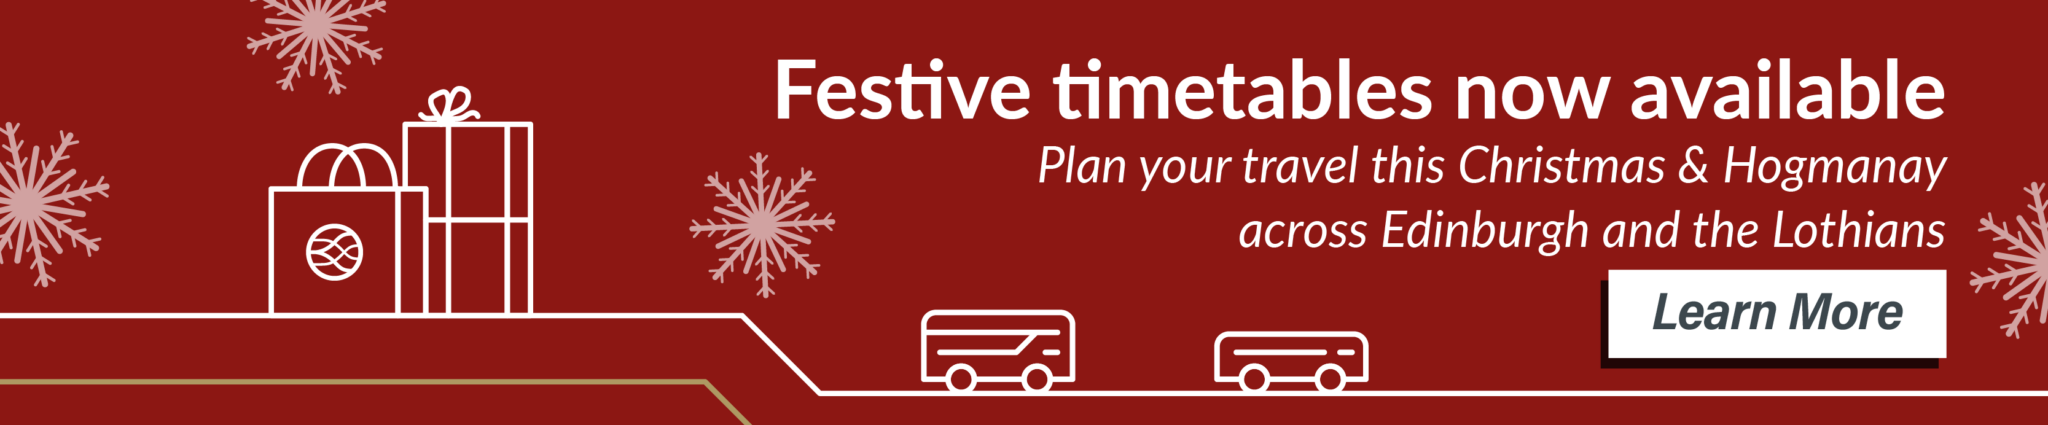 Festive timetables now available. Plan your travel this Christmas & Hogmanay across Edinburgh and the Lothians. Learn more.